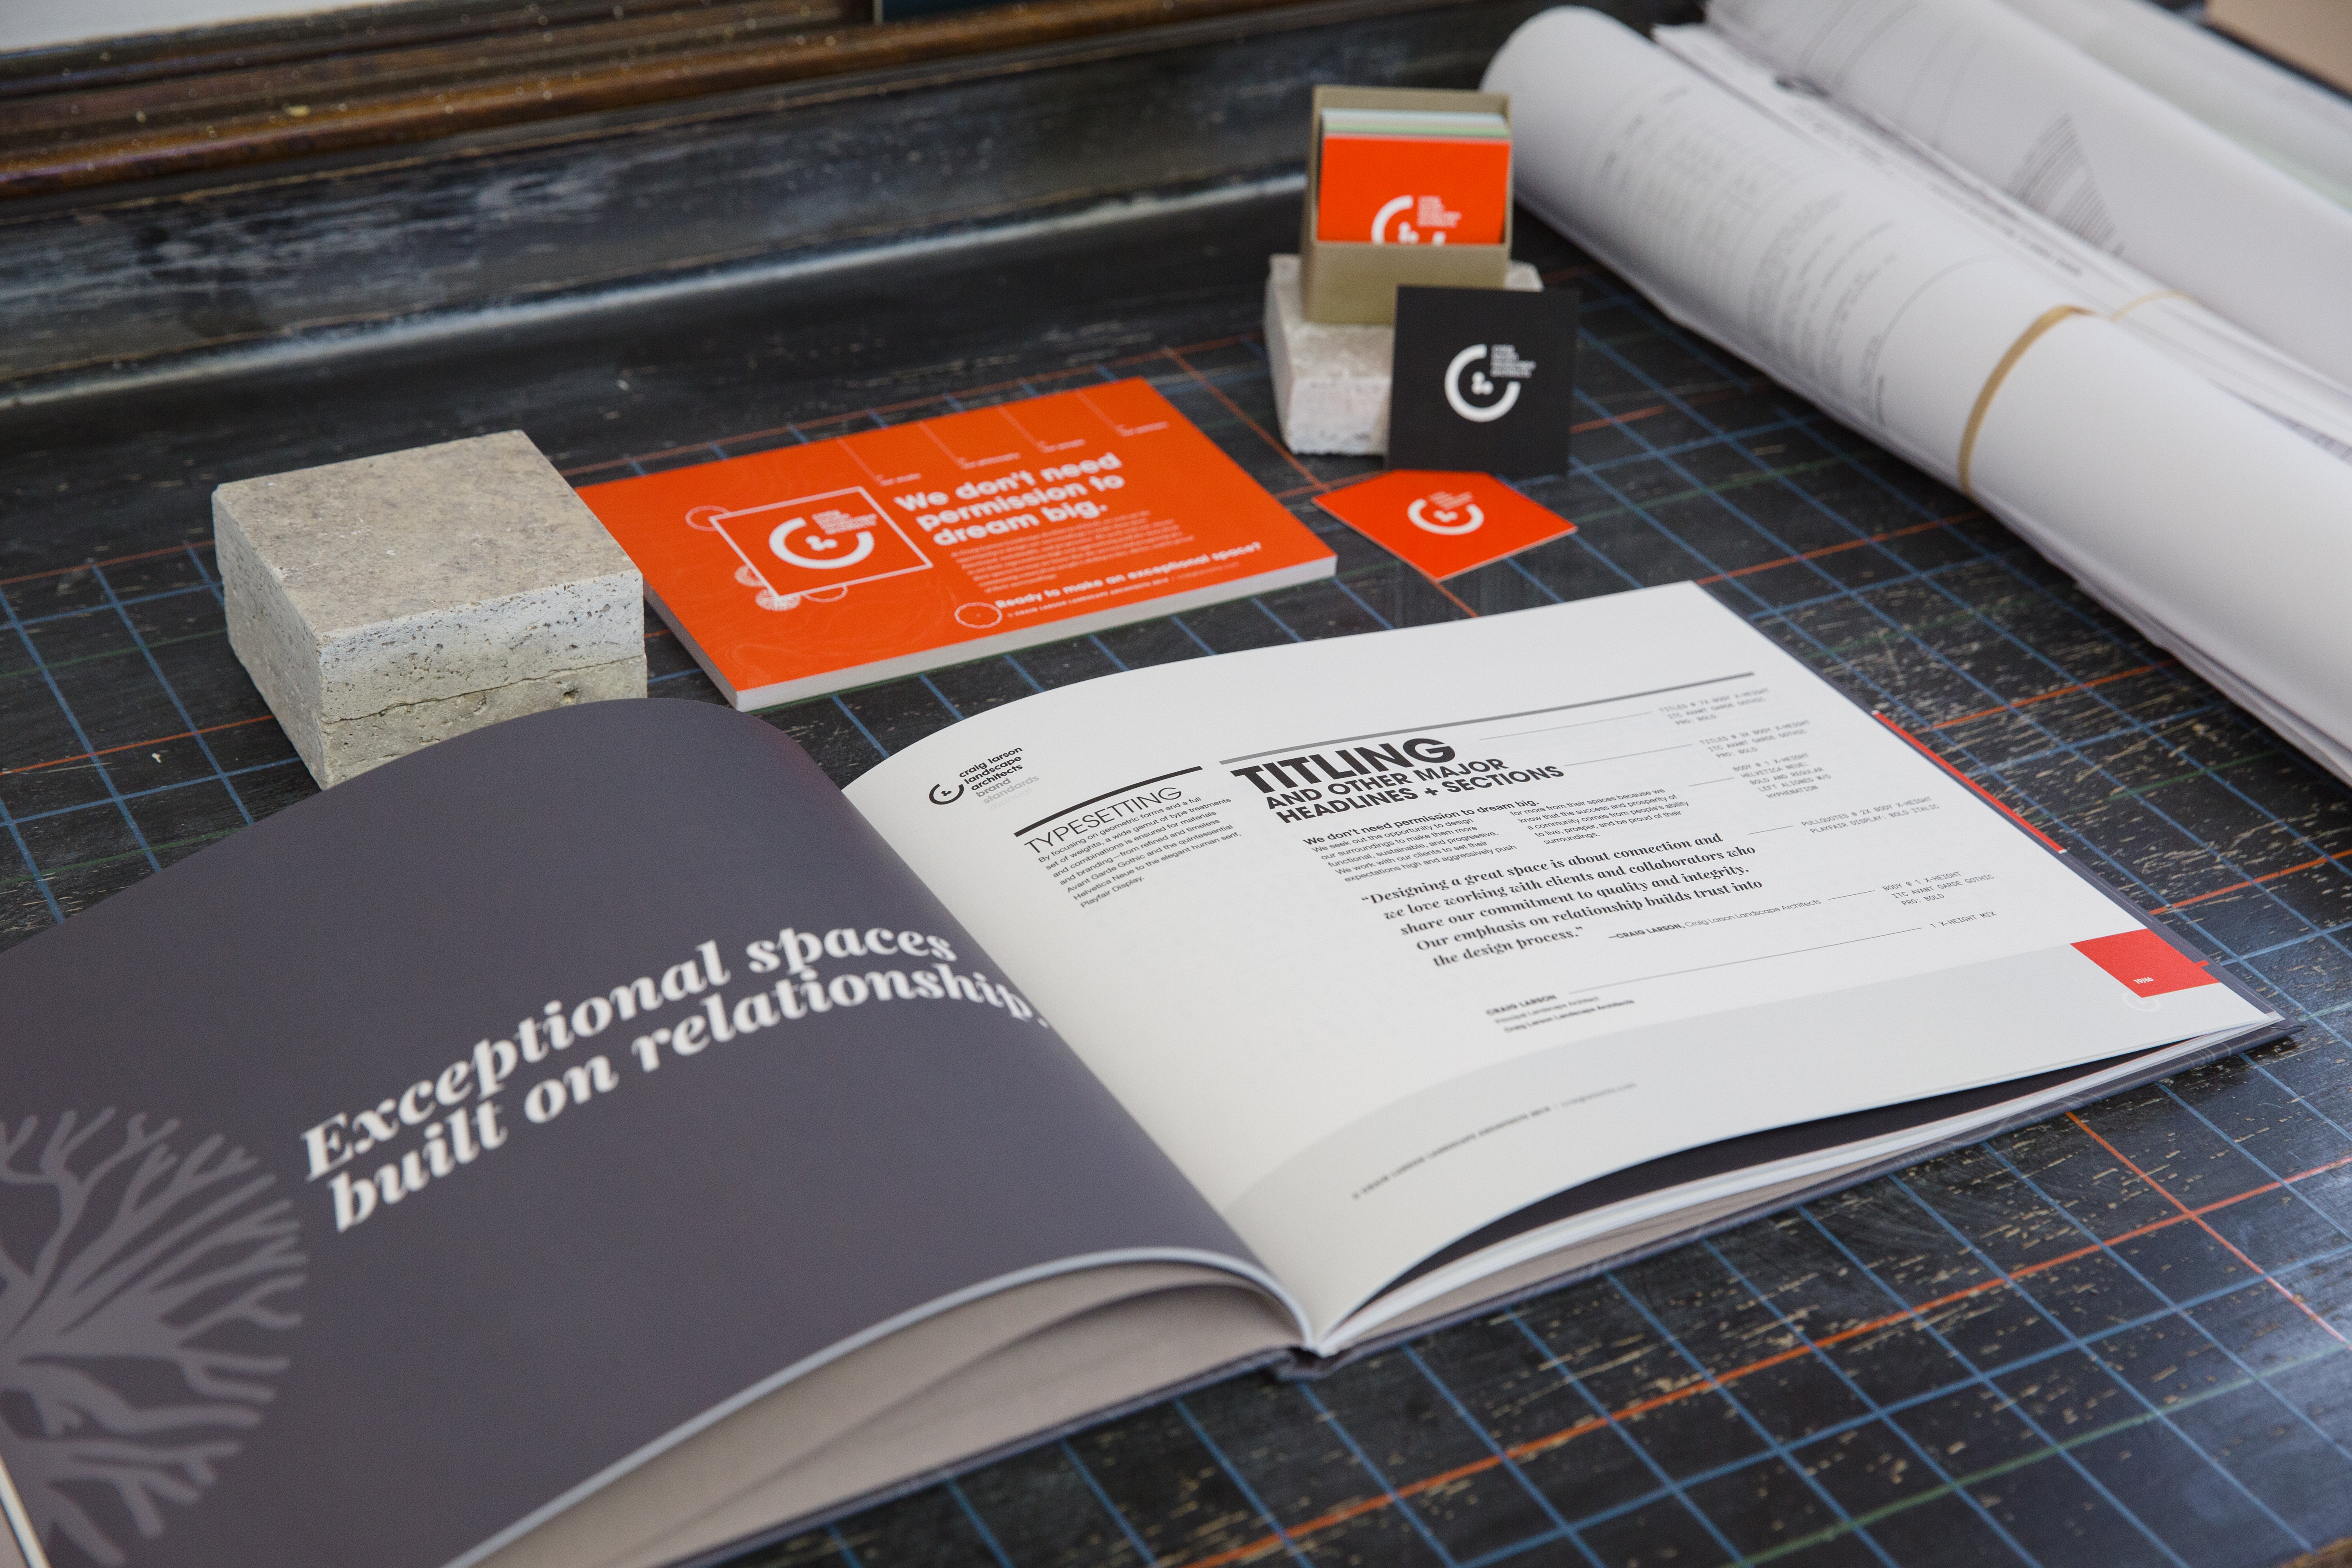 Brand manual displaying typography for CLLA brand identity system next to rolled blueprints on a black gridded mat